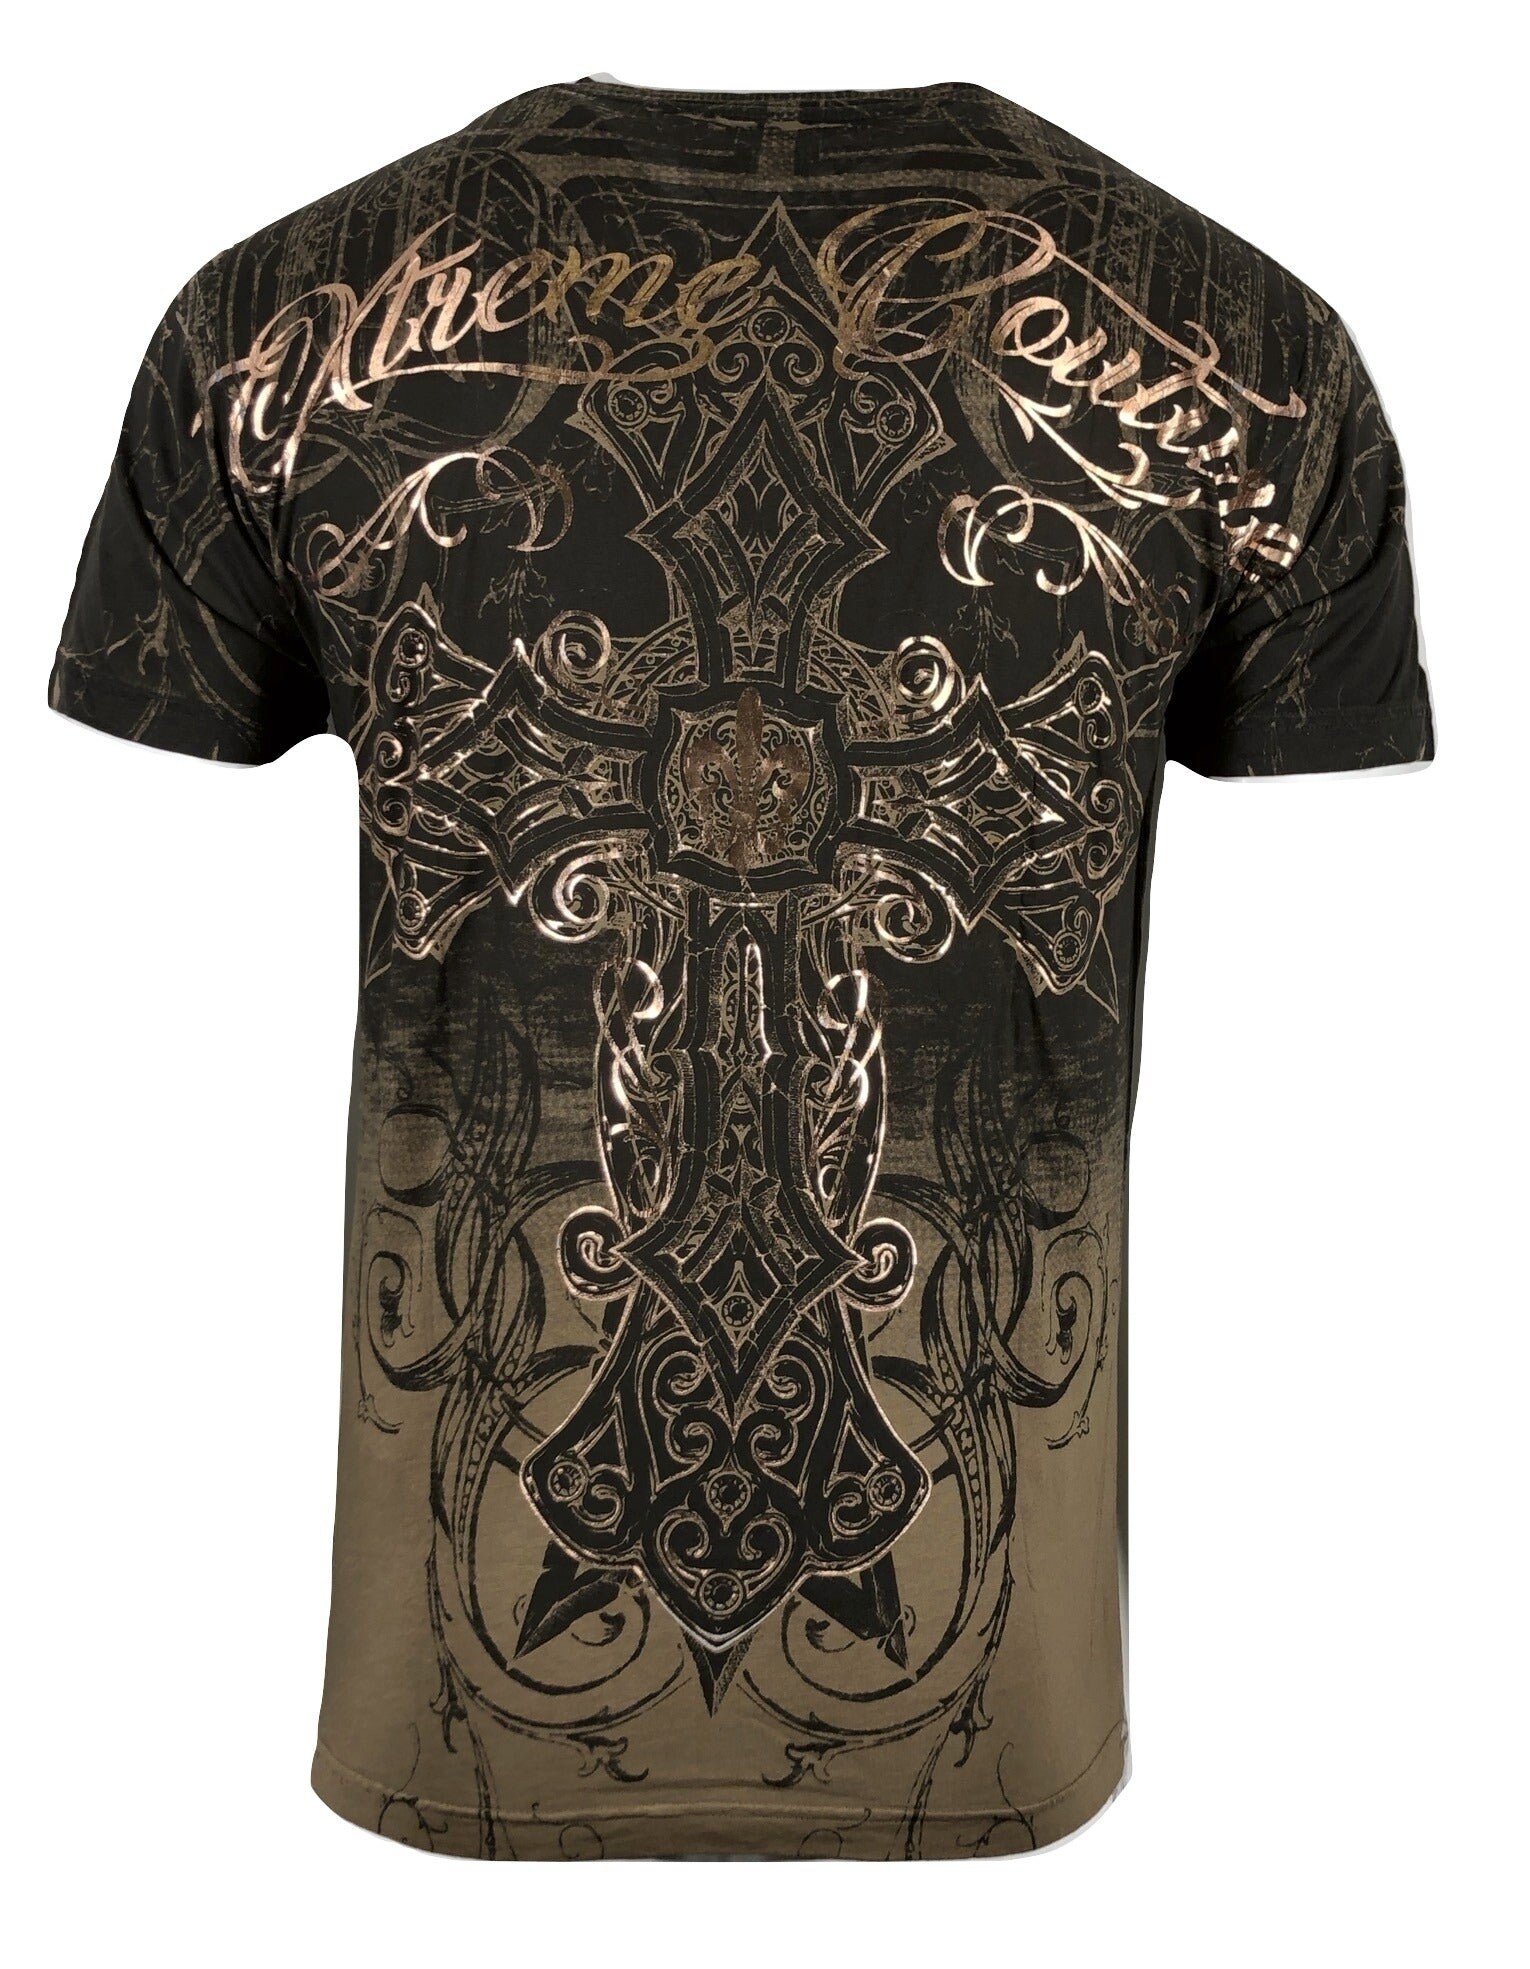 How to Wear Band T-Shirts  Affliction - Affliction Clothing